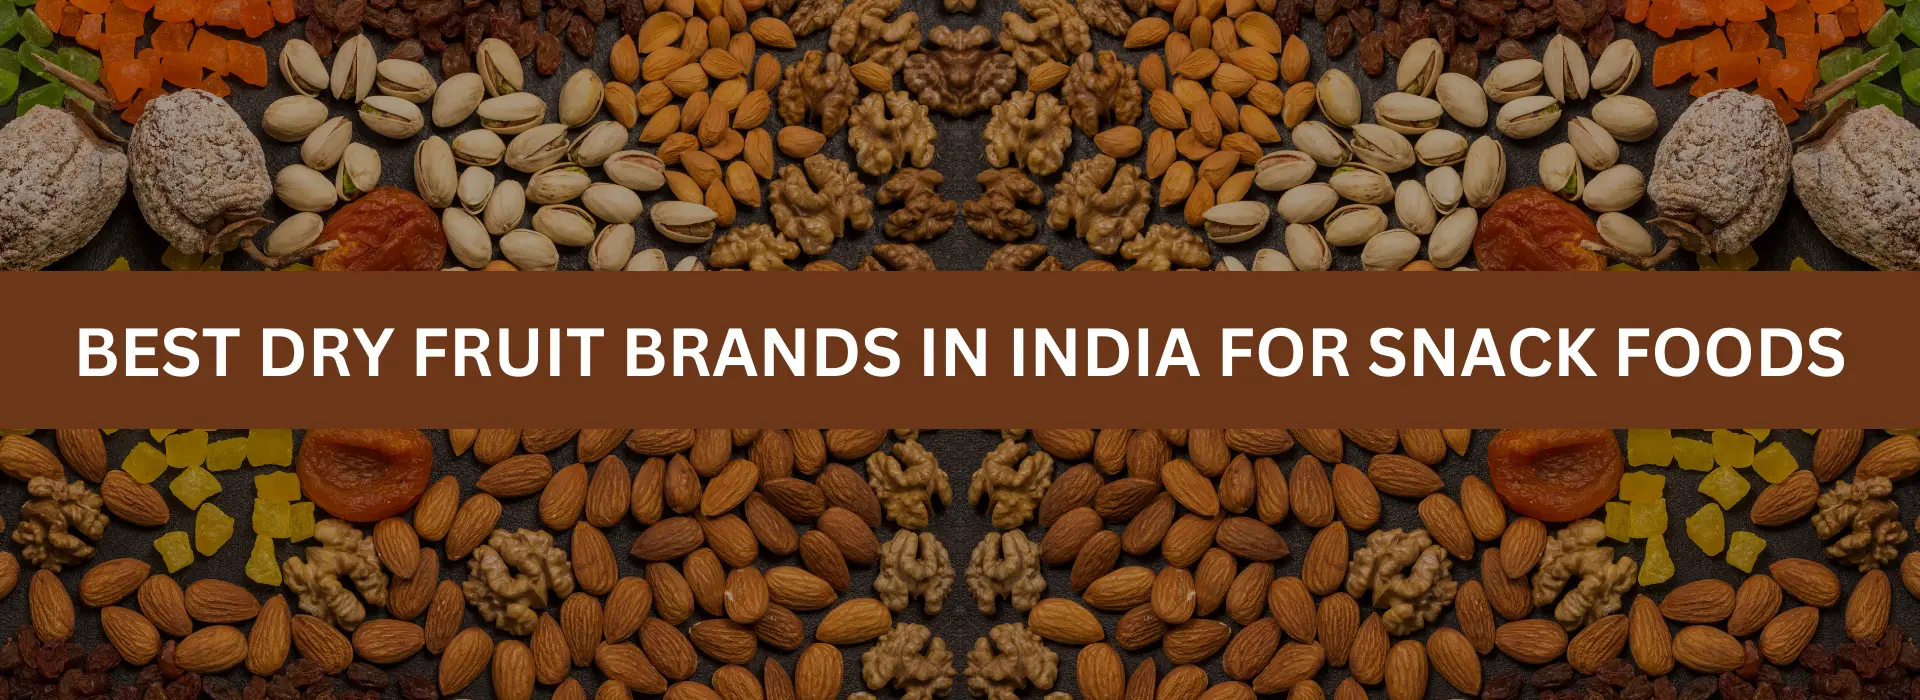 Best Dry Fruit Brands in India for Snack Foods